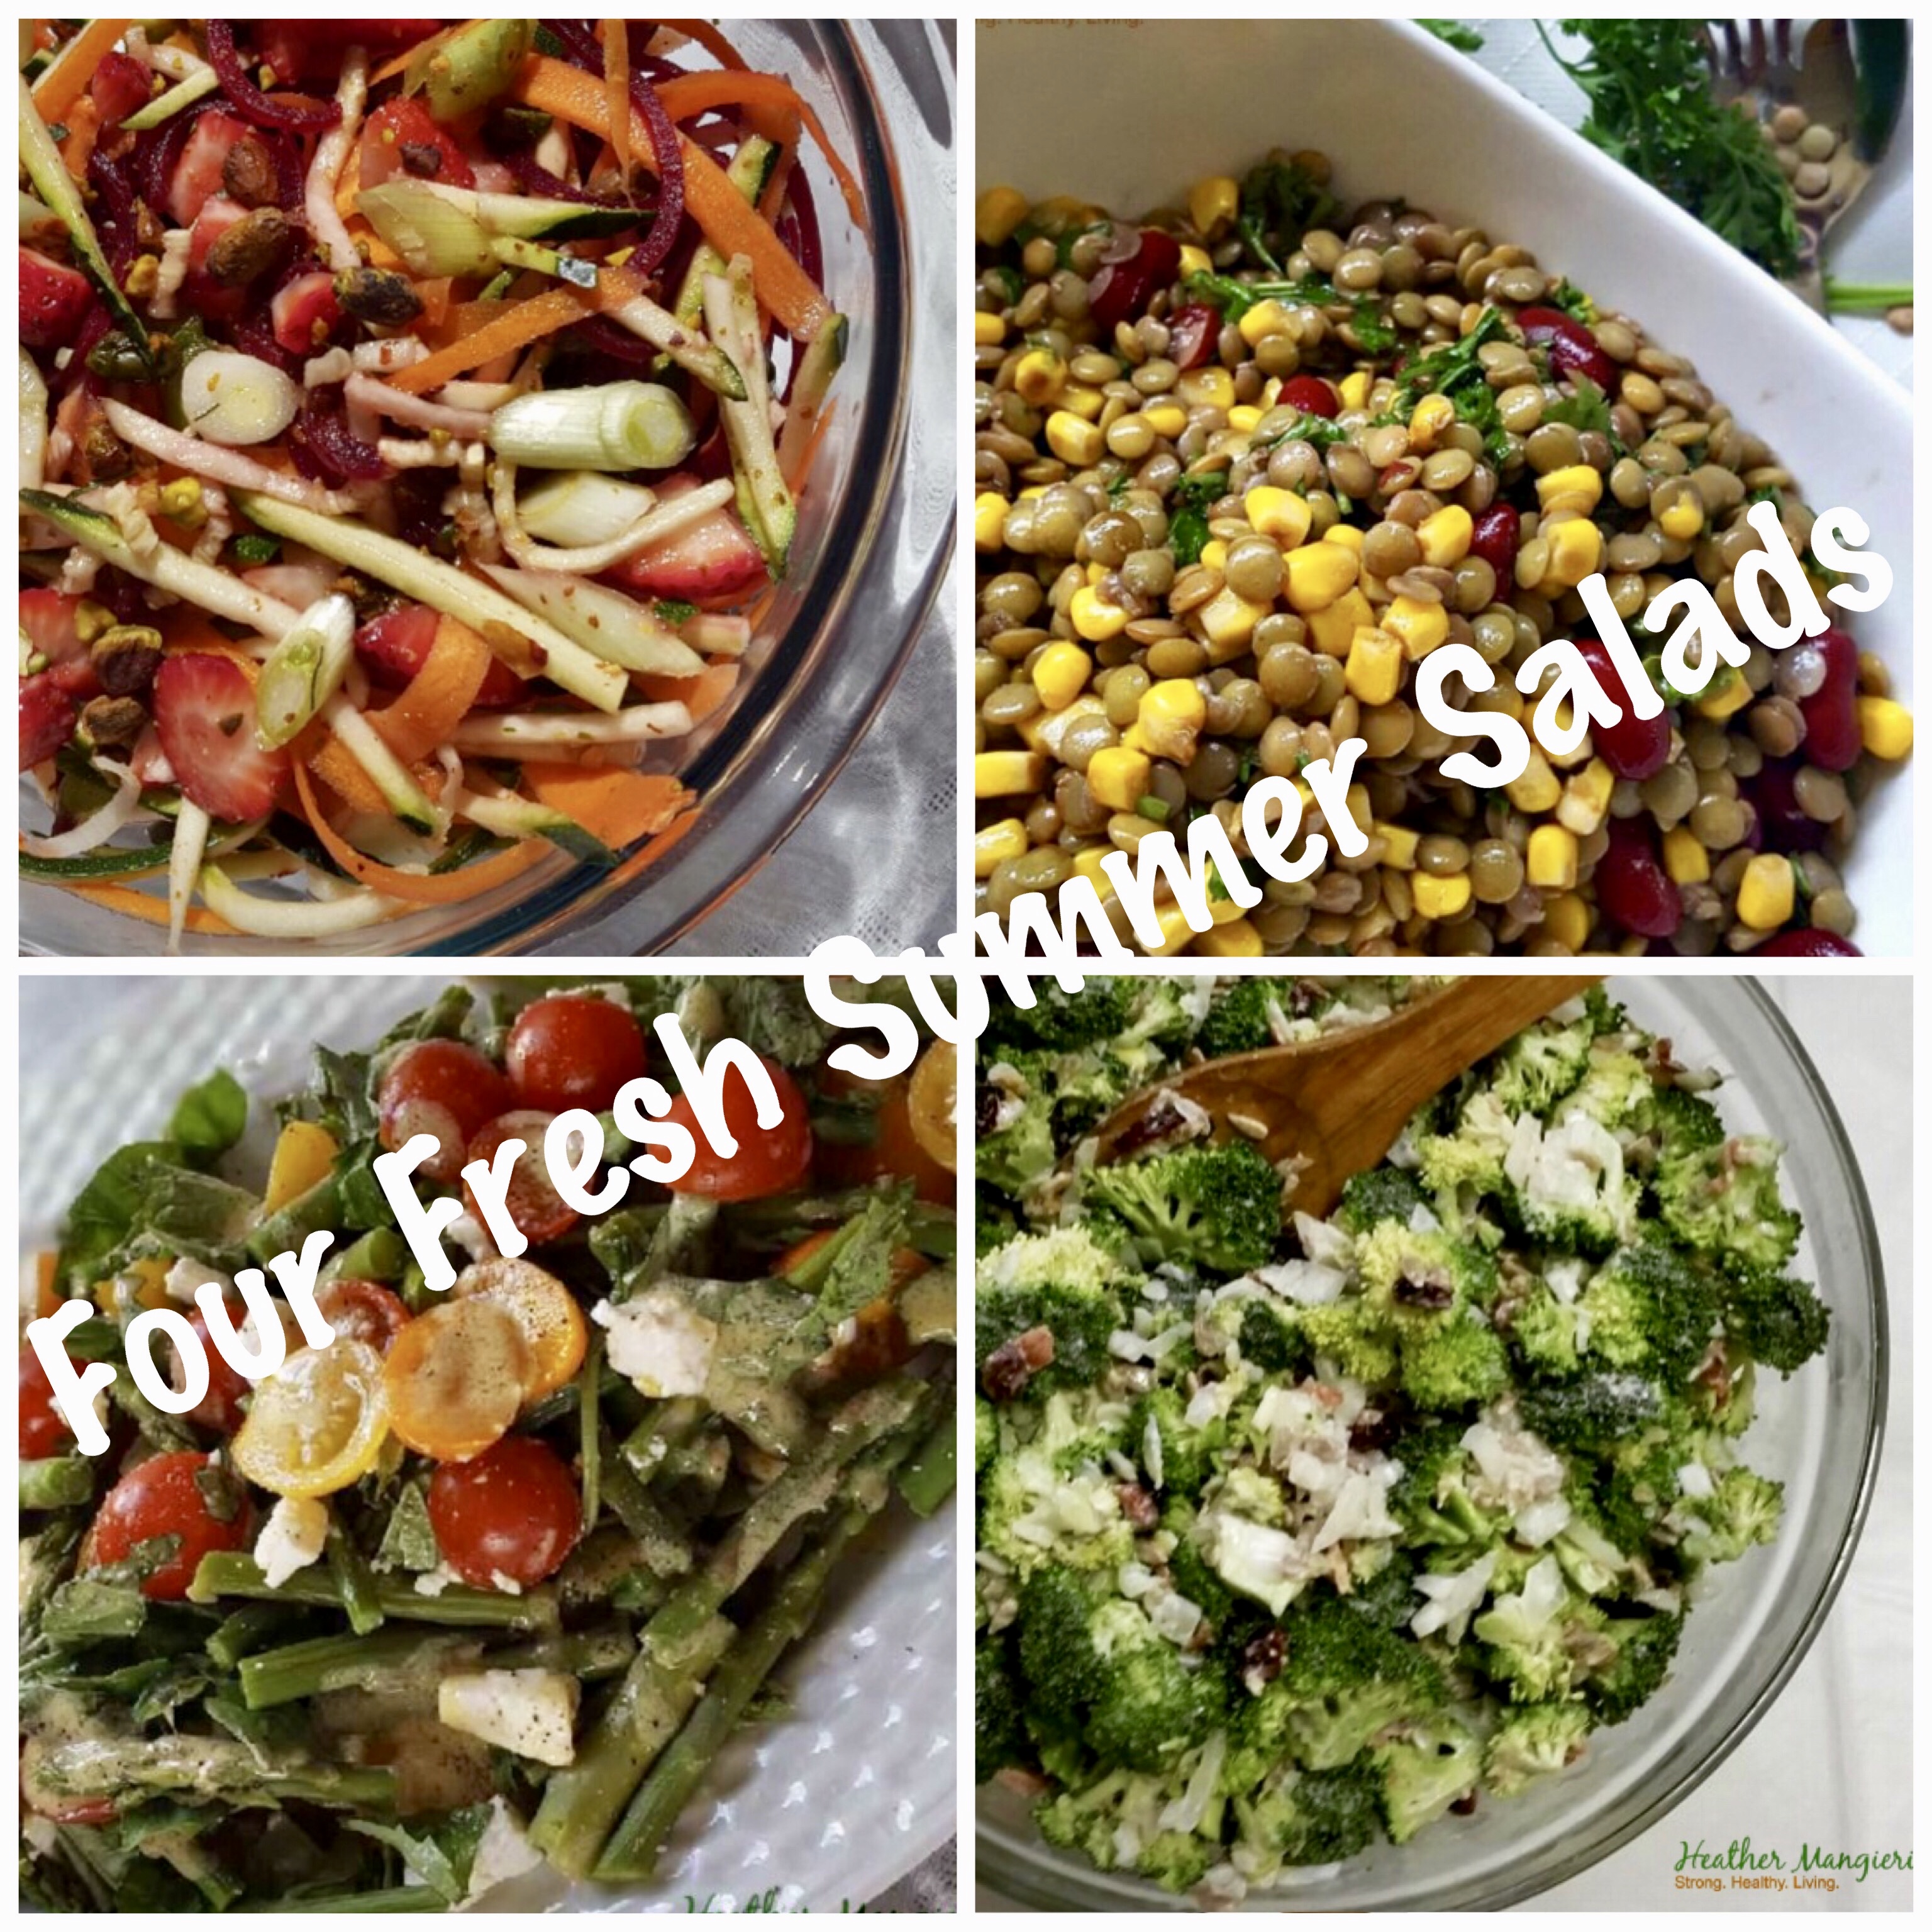 Four Fresh Summer Salads for your next picnic or party